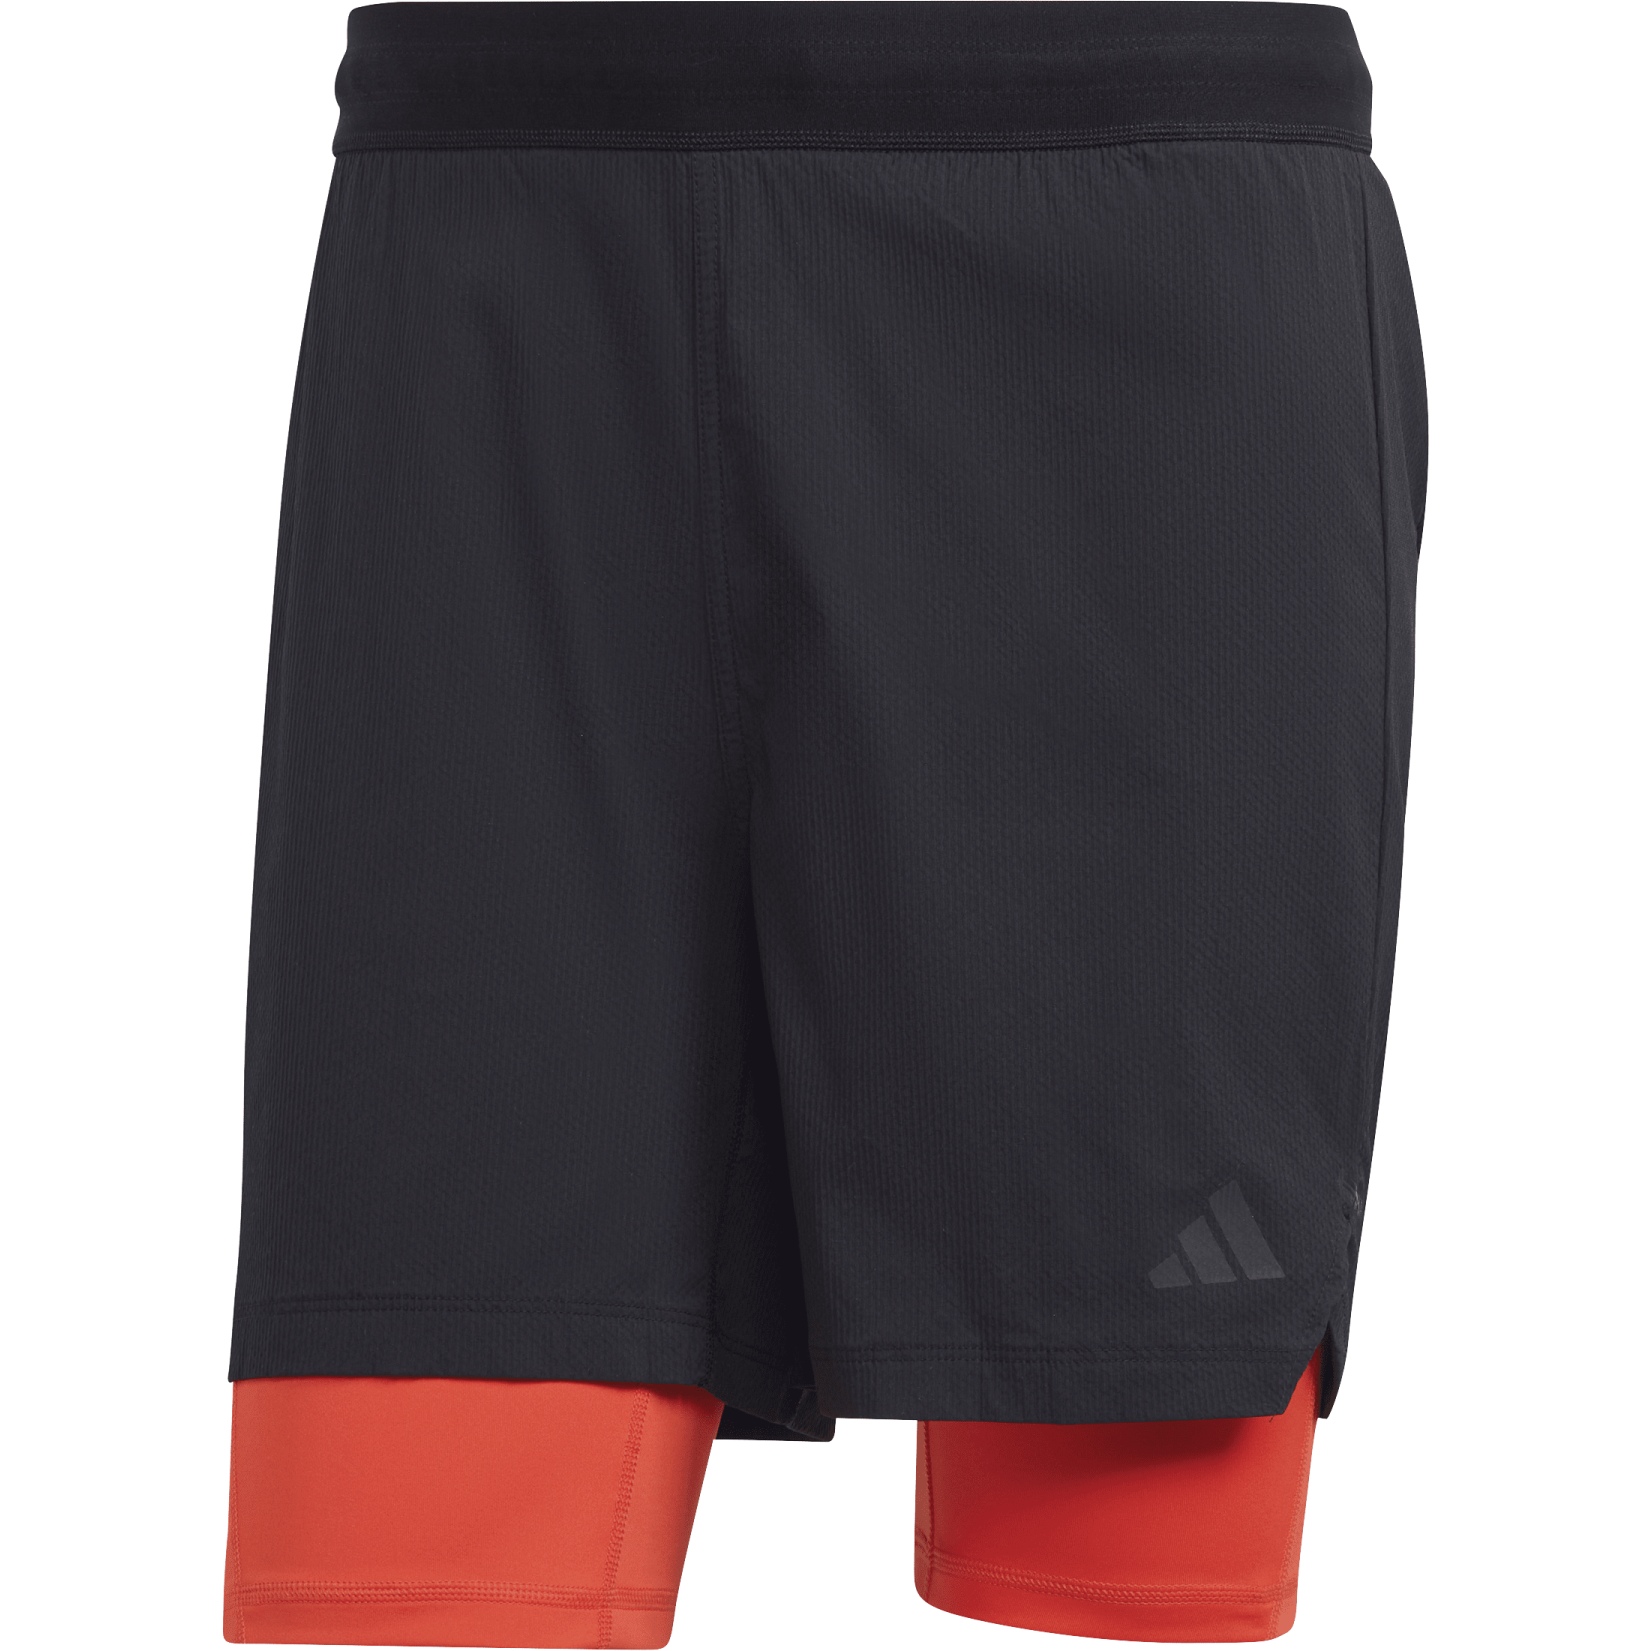 Productfoto van adidas 2-In-1 Power Workout 7&quot; Shorts Heren - black/bright red/black HY0778